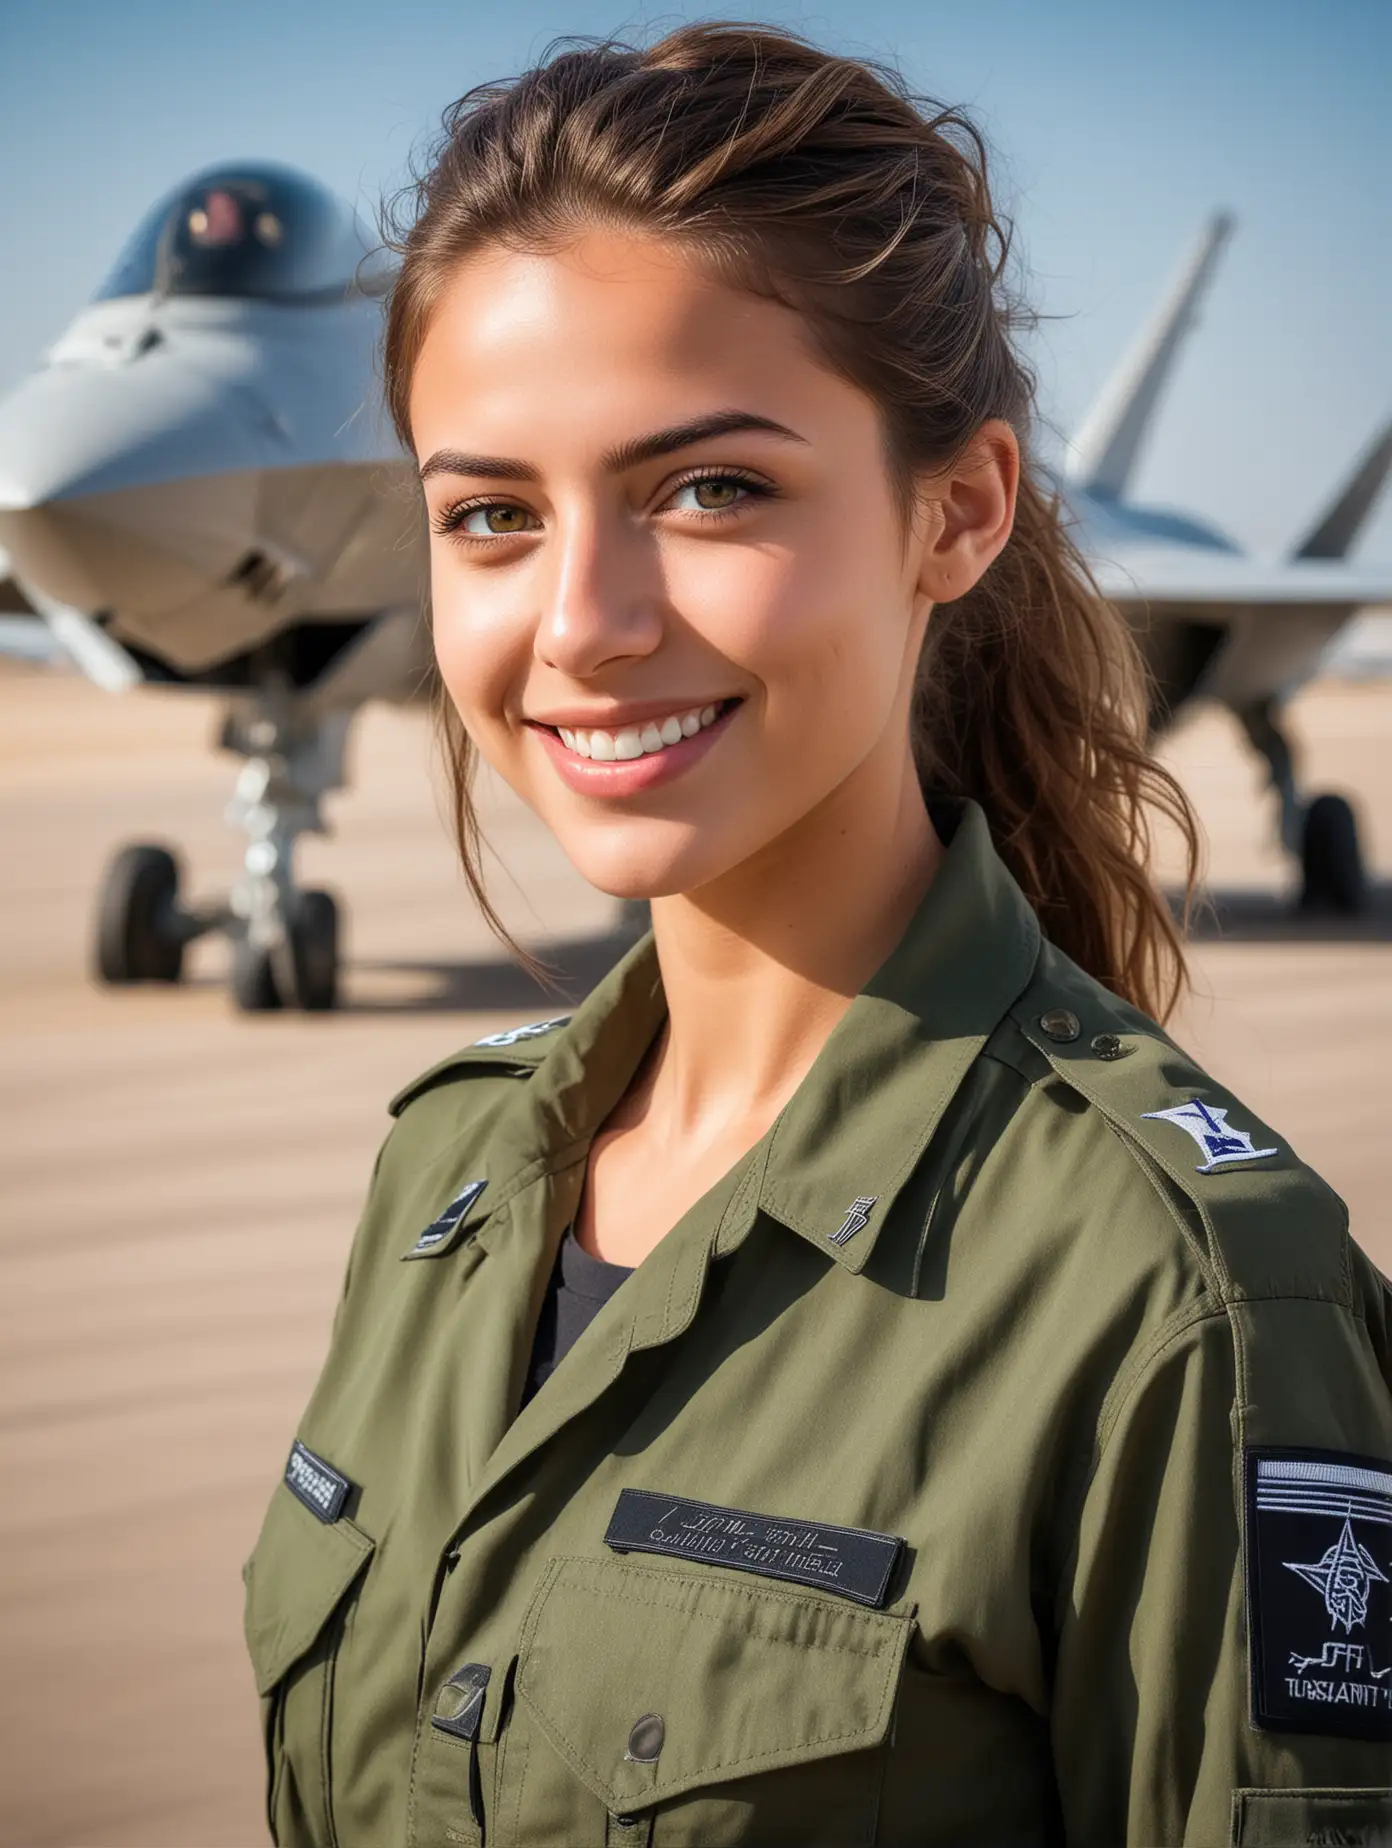 
Israel girl, a beautiful Israel girl wearing a military uniform , smiles at the camera. Exquisite facial features, With the F22 fighter plane at the airport as the background, professional photography technology, full body portrait